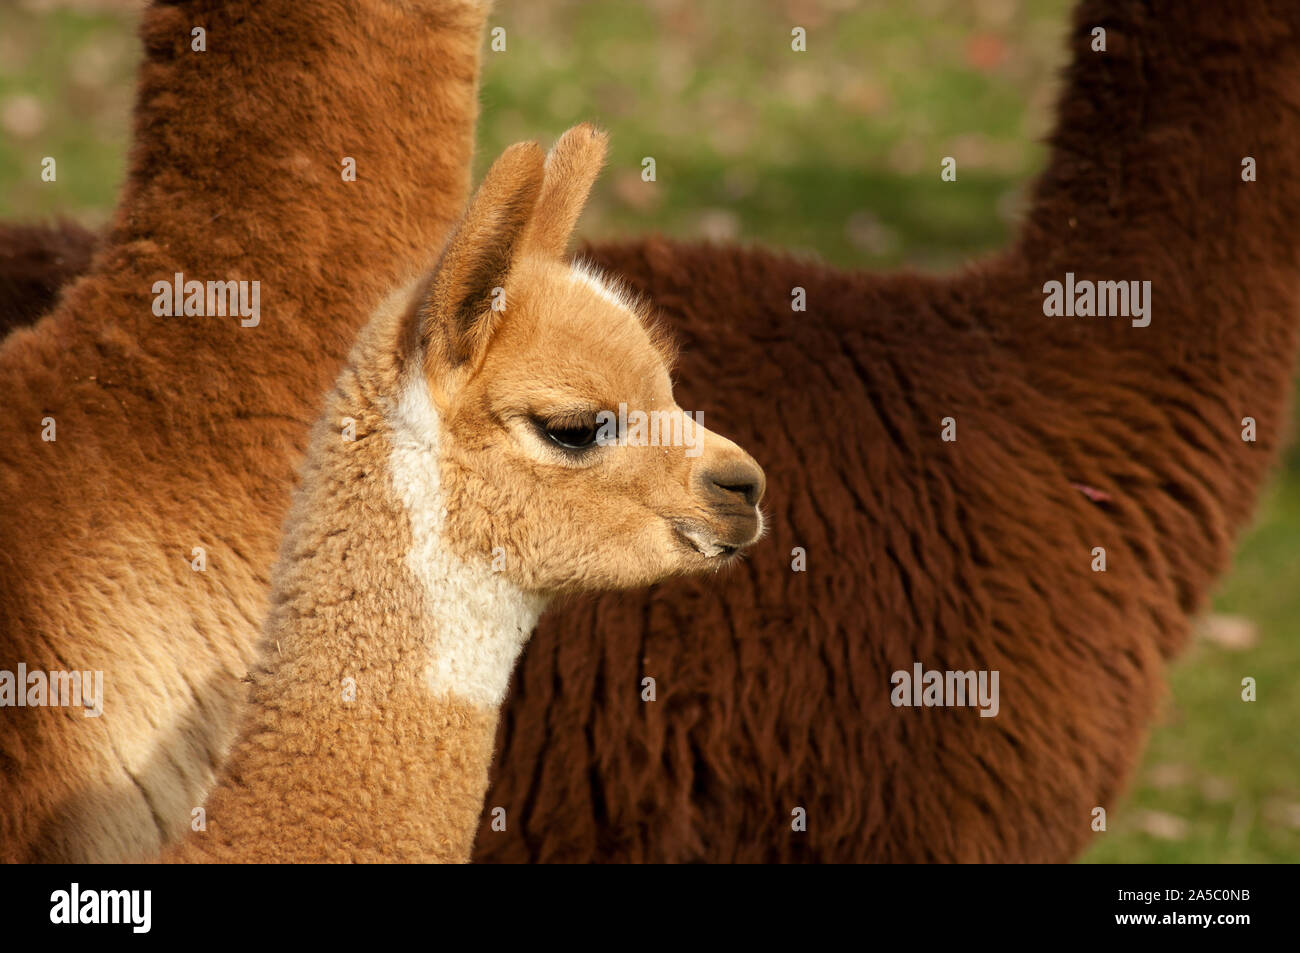 Headshot of a young alpaca in profile. Stock Photo